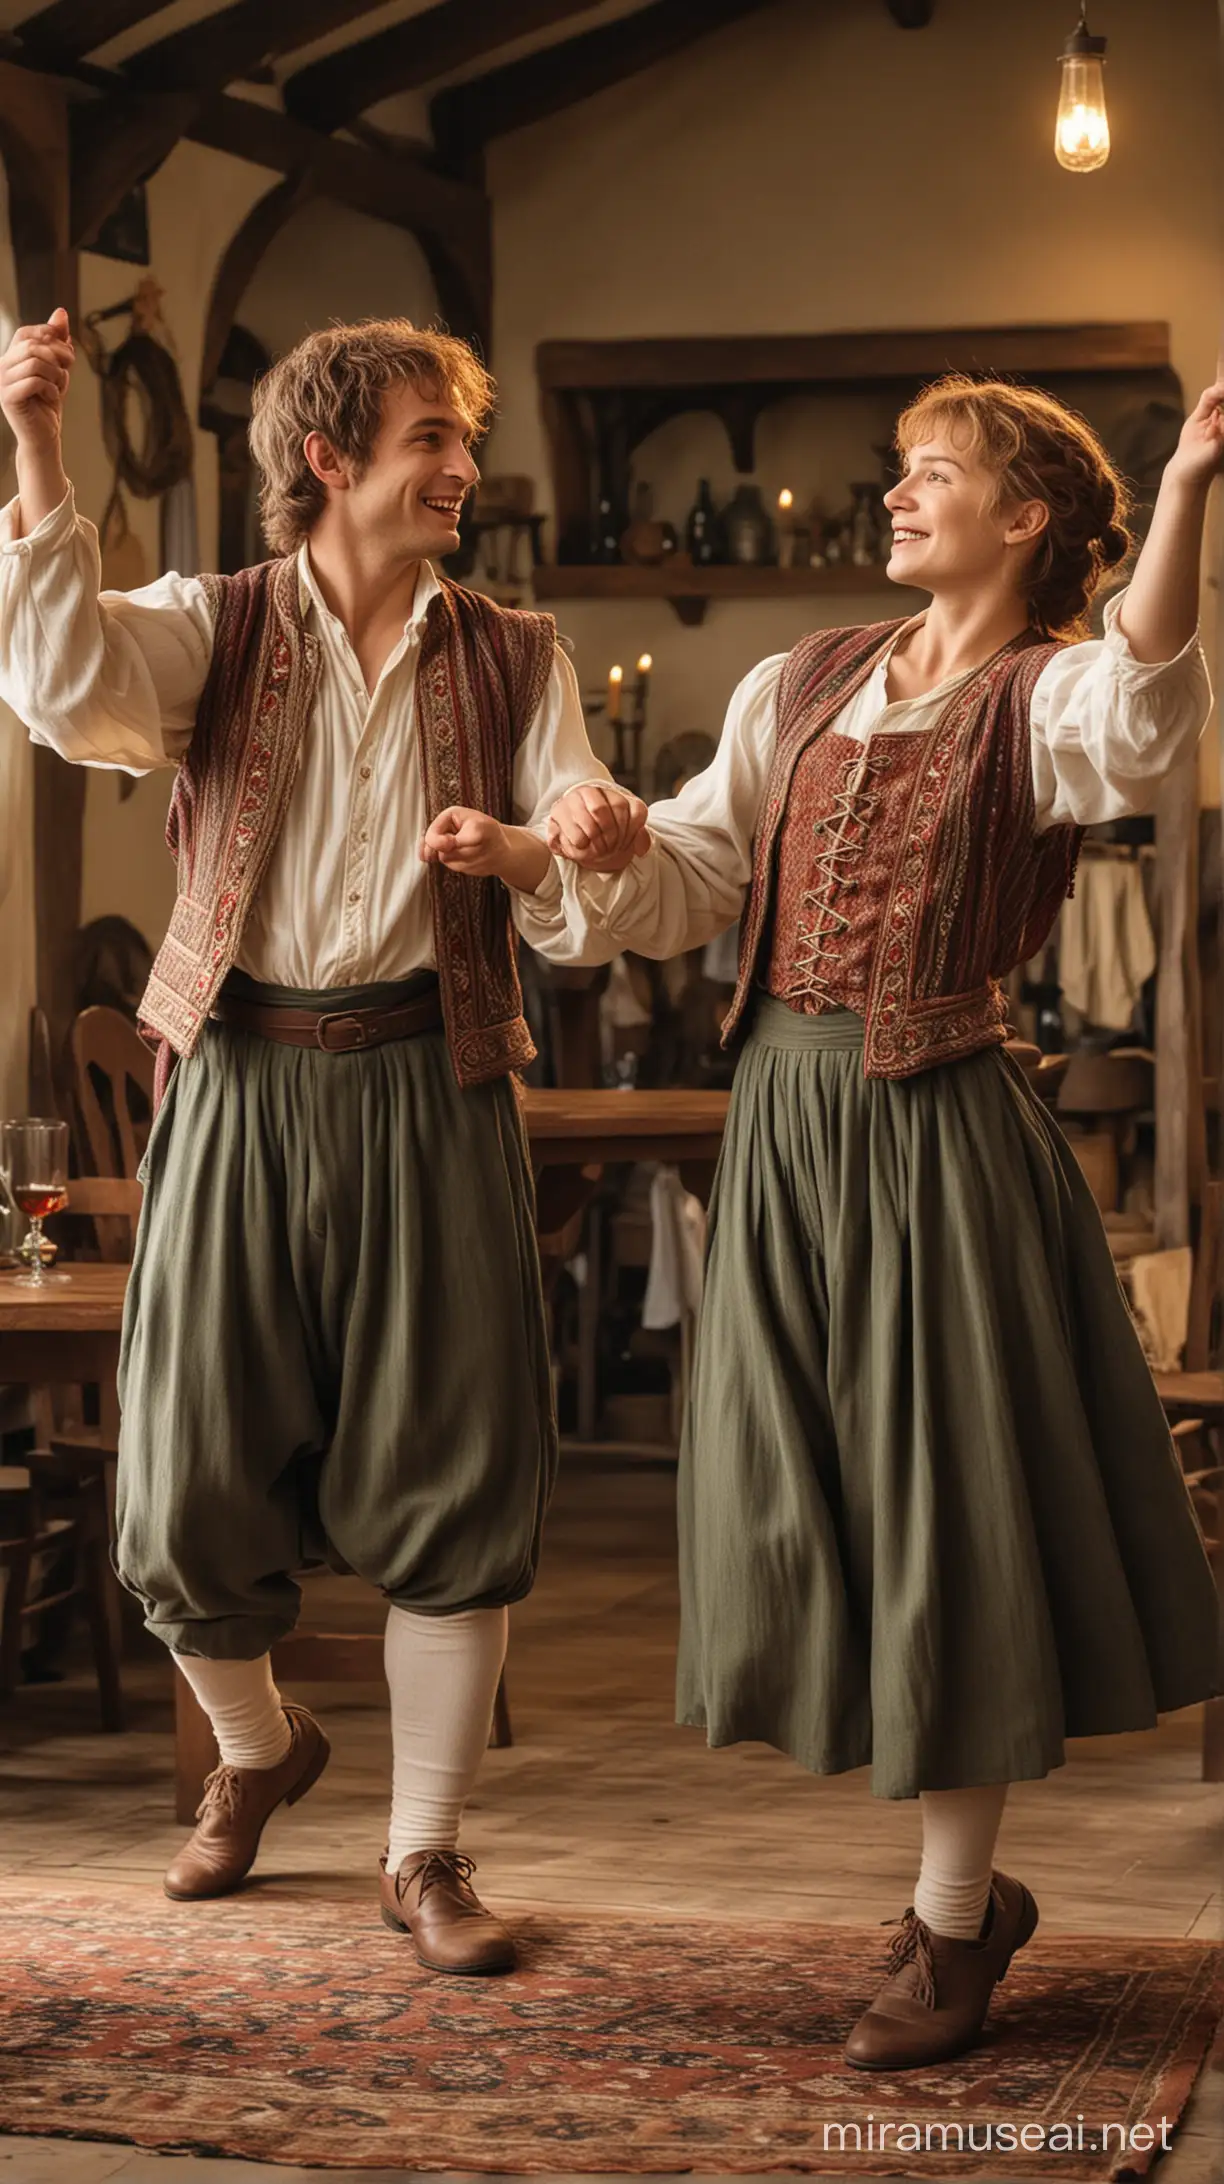 Merry and Pippin, the Hobbits, dressed in Romanian Traditional Clothes, dancing on the tables